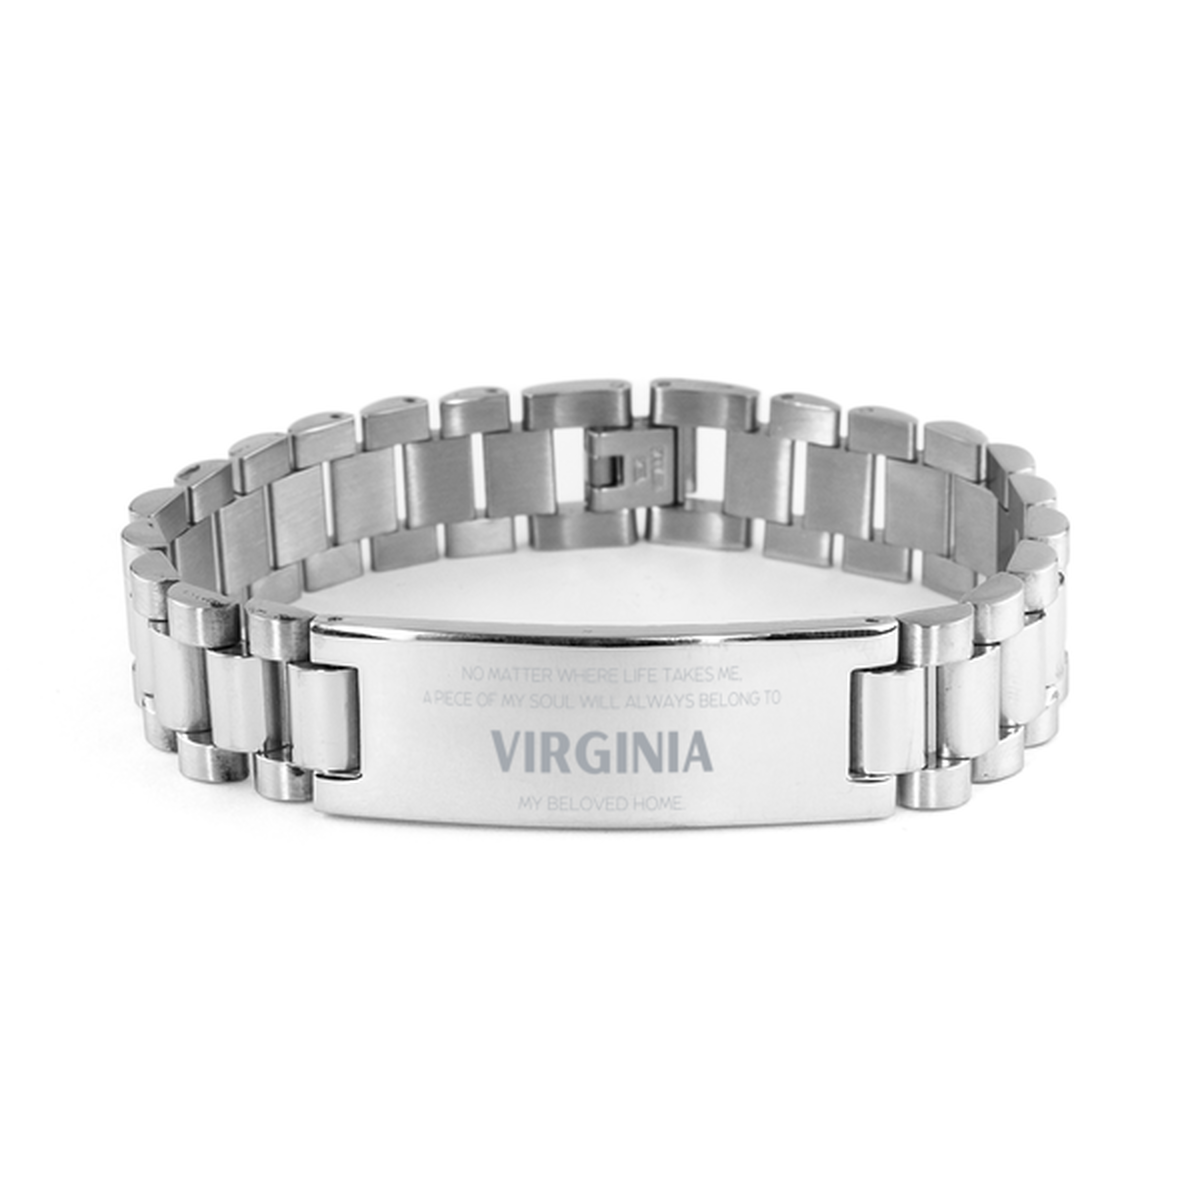 Love Virginia State Gifts, My soul will always belong to Virginia, Proud Ladder Stainless Steel Bracelet, Birthday Unique Gifts For Virginia Men, Women, Friends